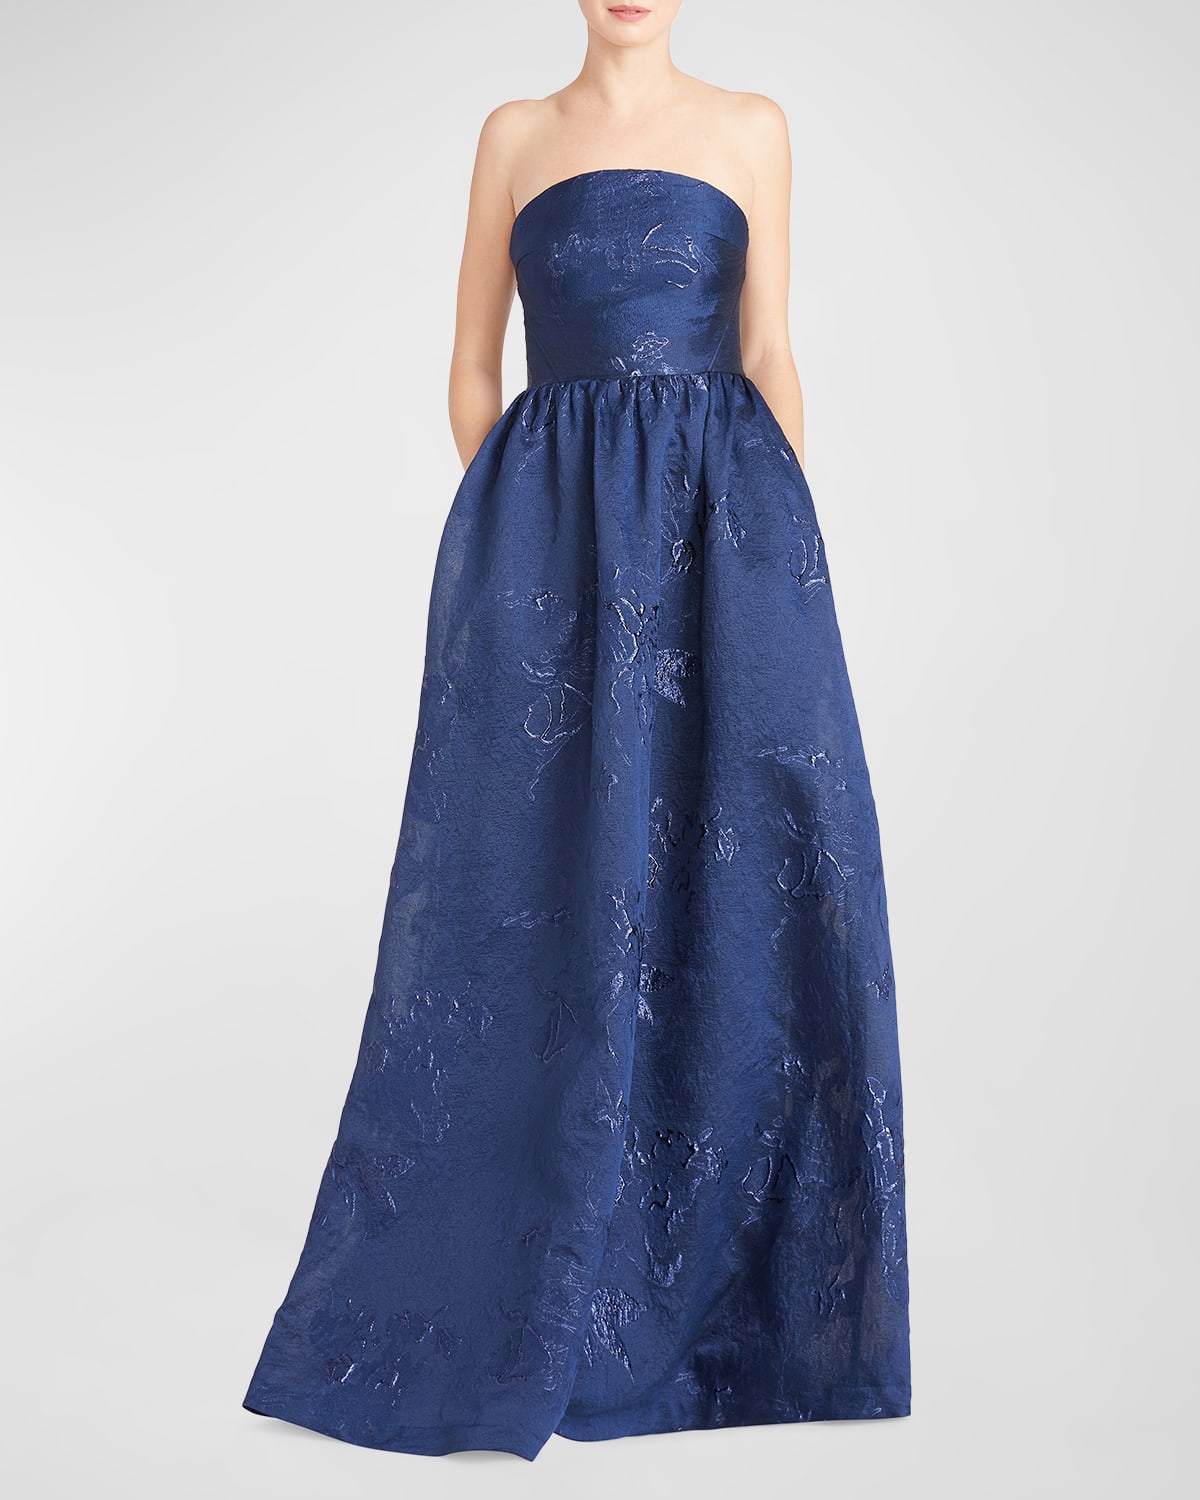 Monique Lhuillier Strapless Metallic Jacquard Fit-&-flare Gown In Navy